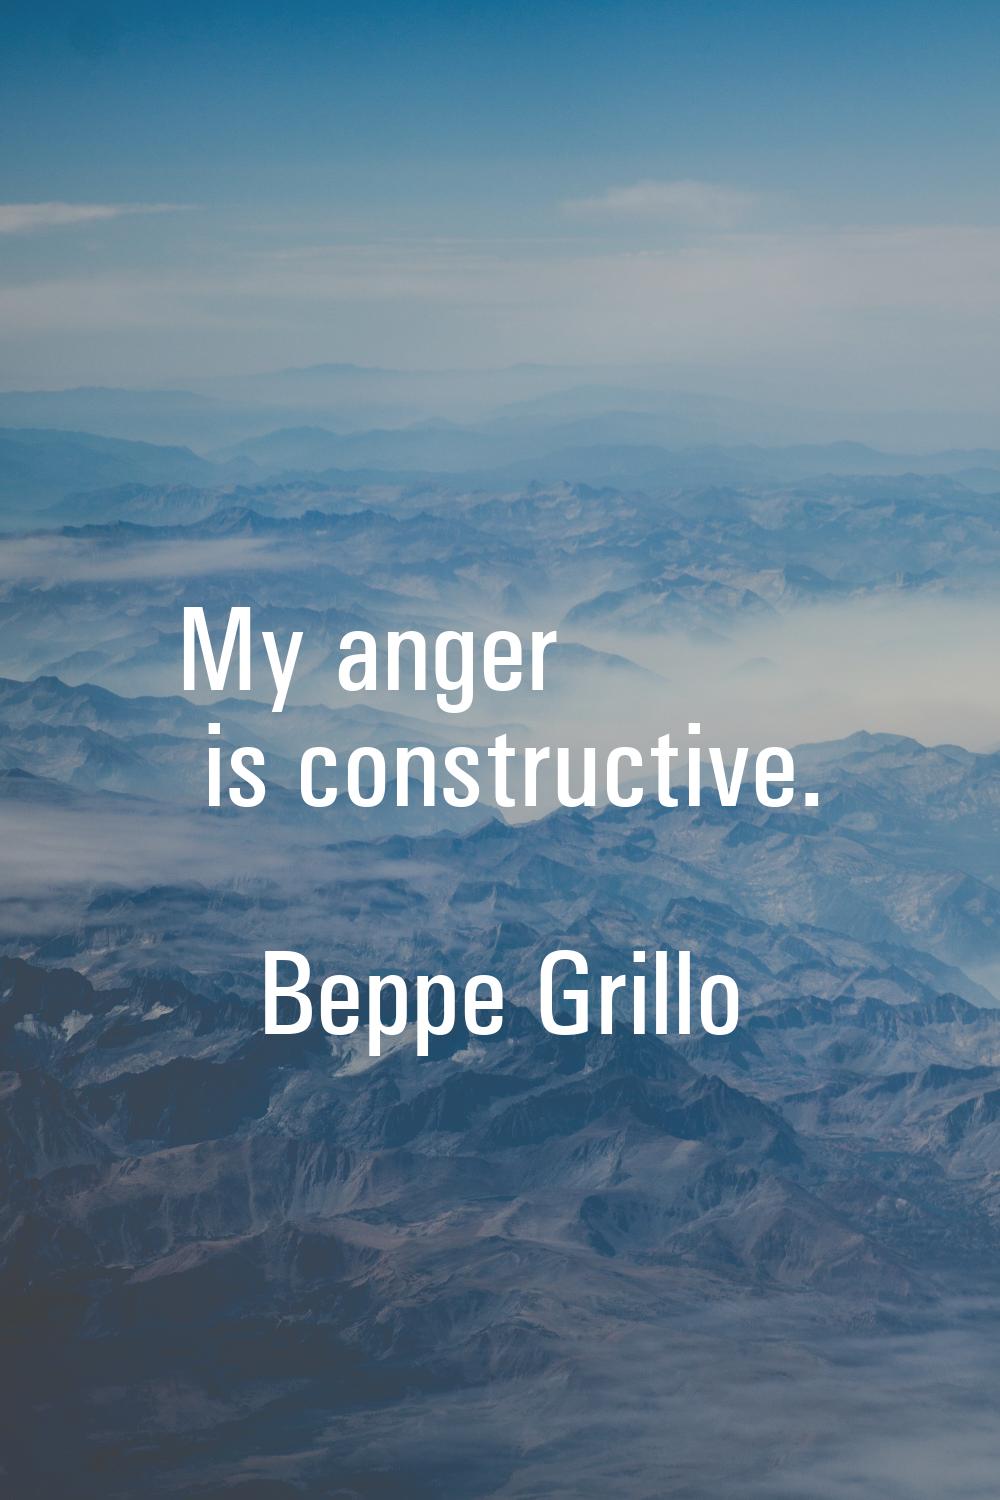 My anger is constructive.